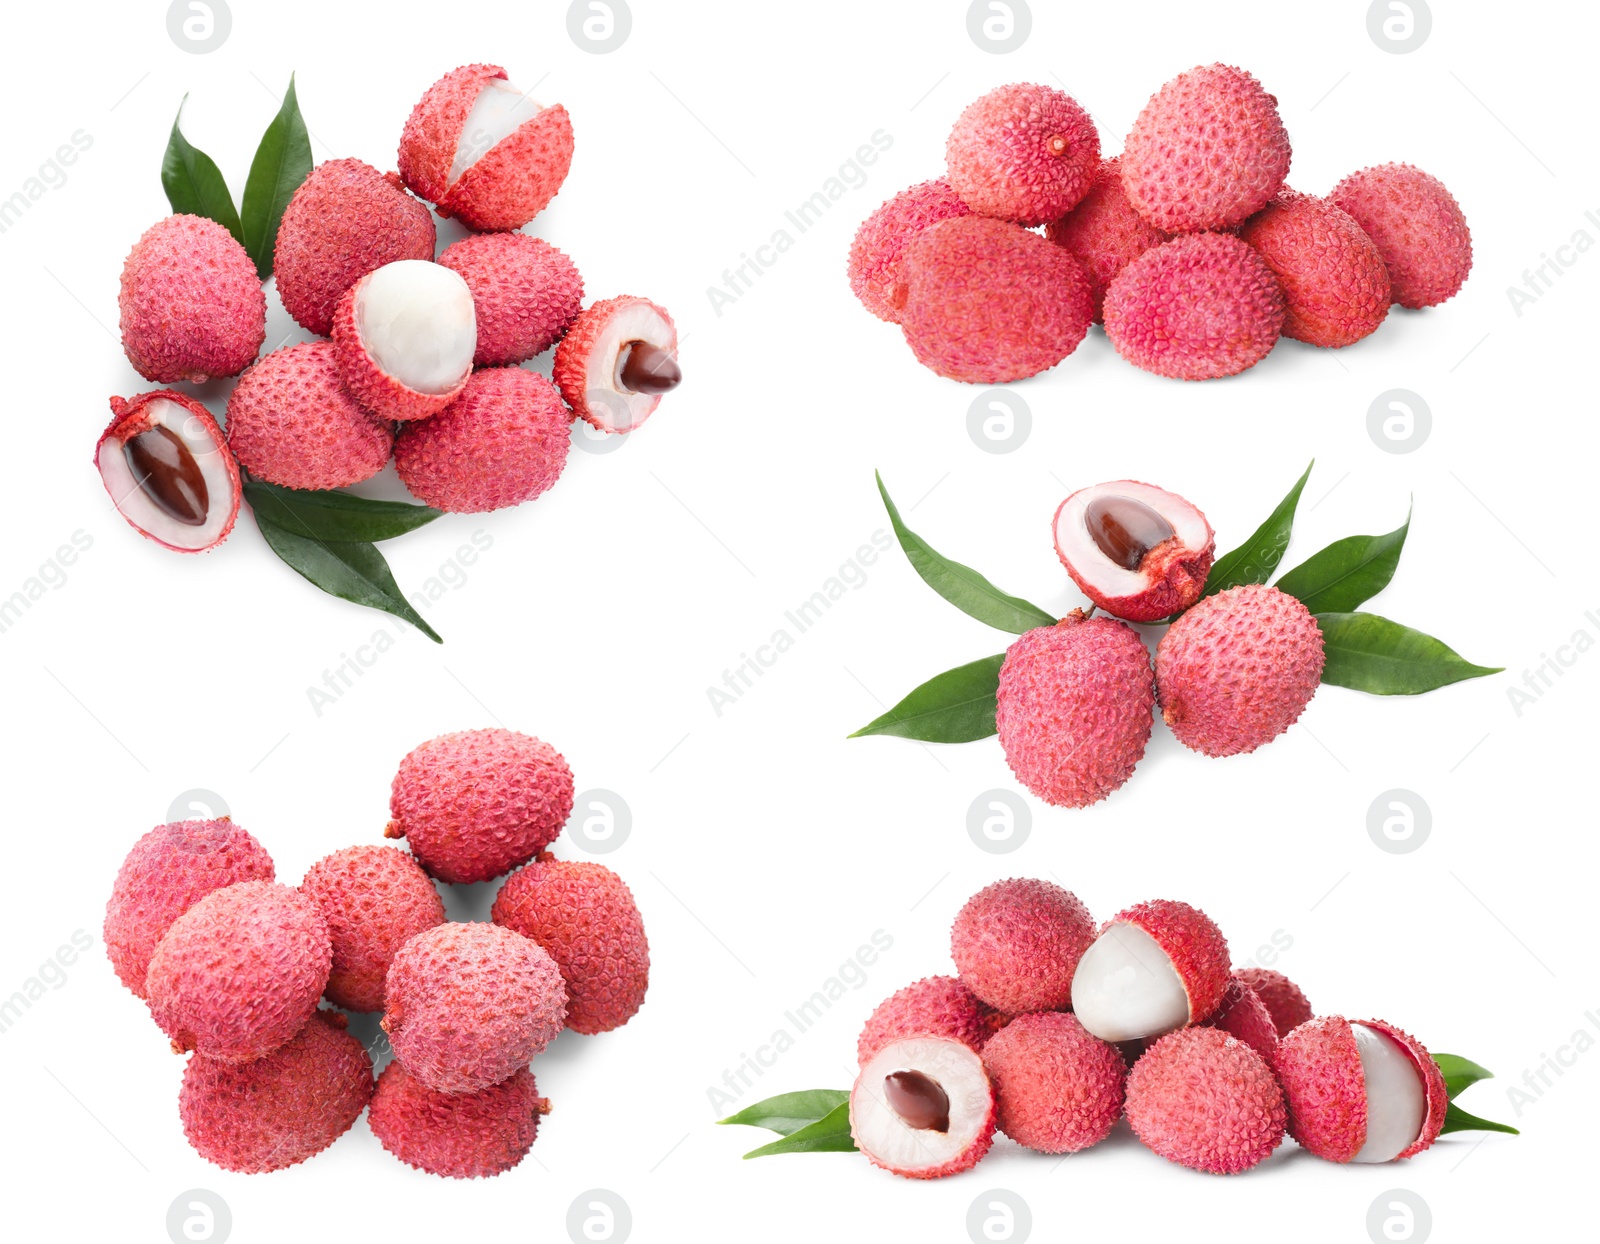 Image of Set of delicious fresh lychees on white background